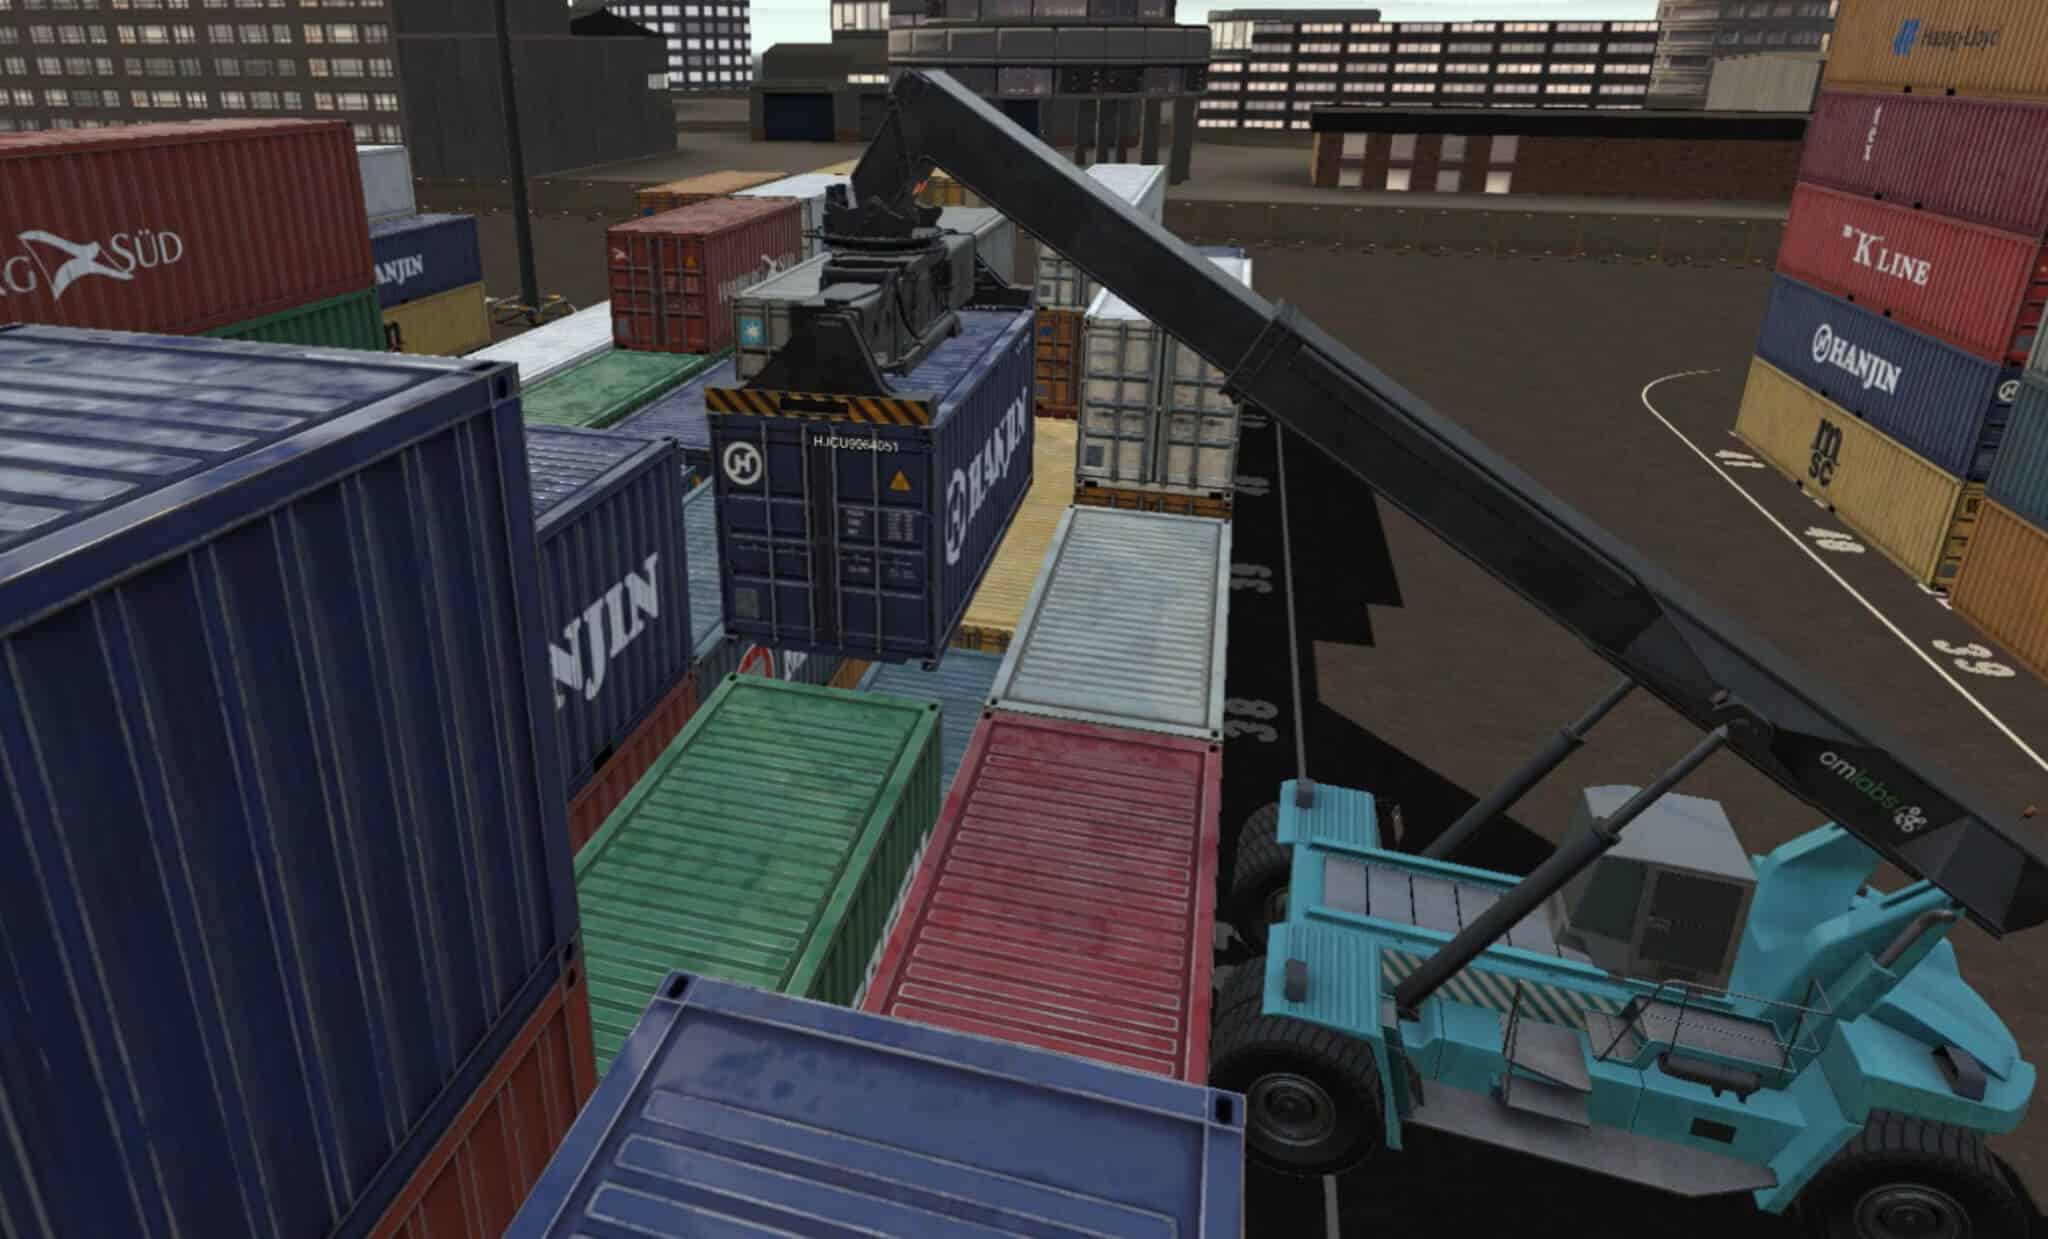 Reachstacker Simulator – Dropping a container